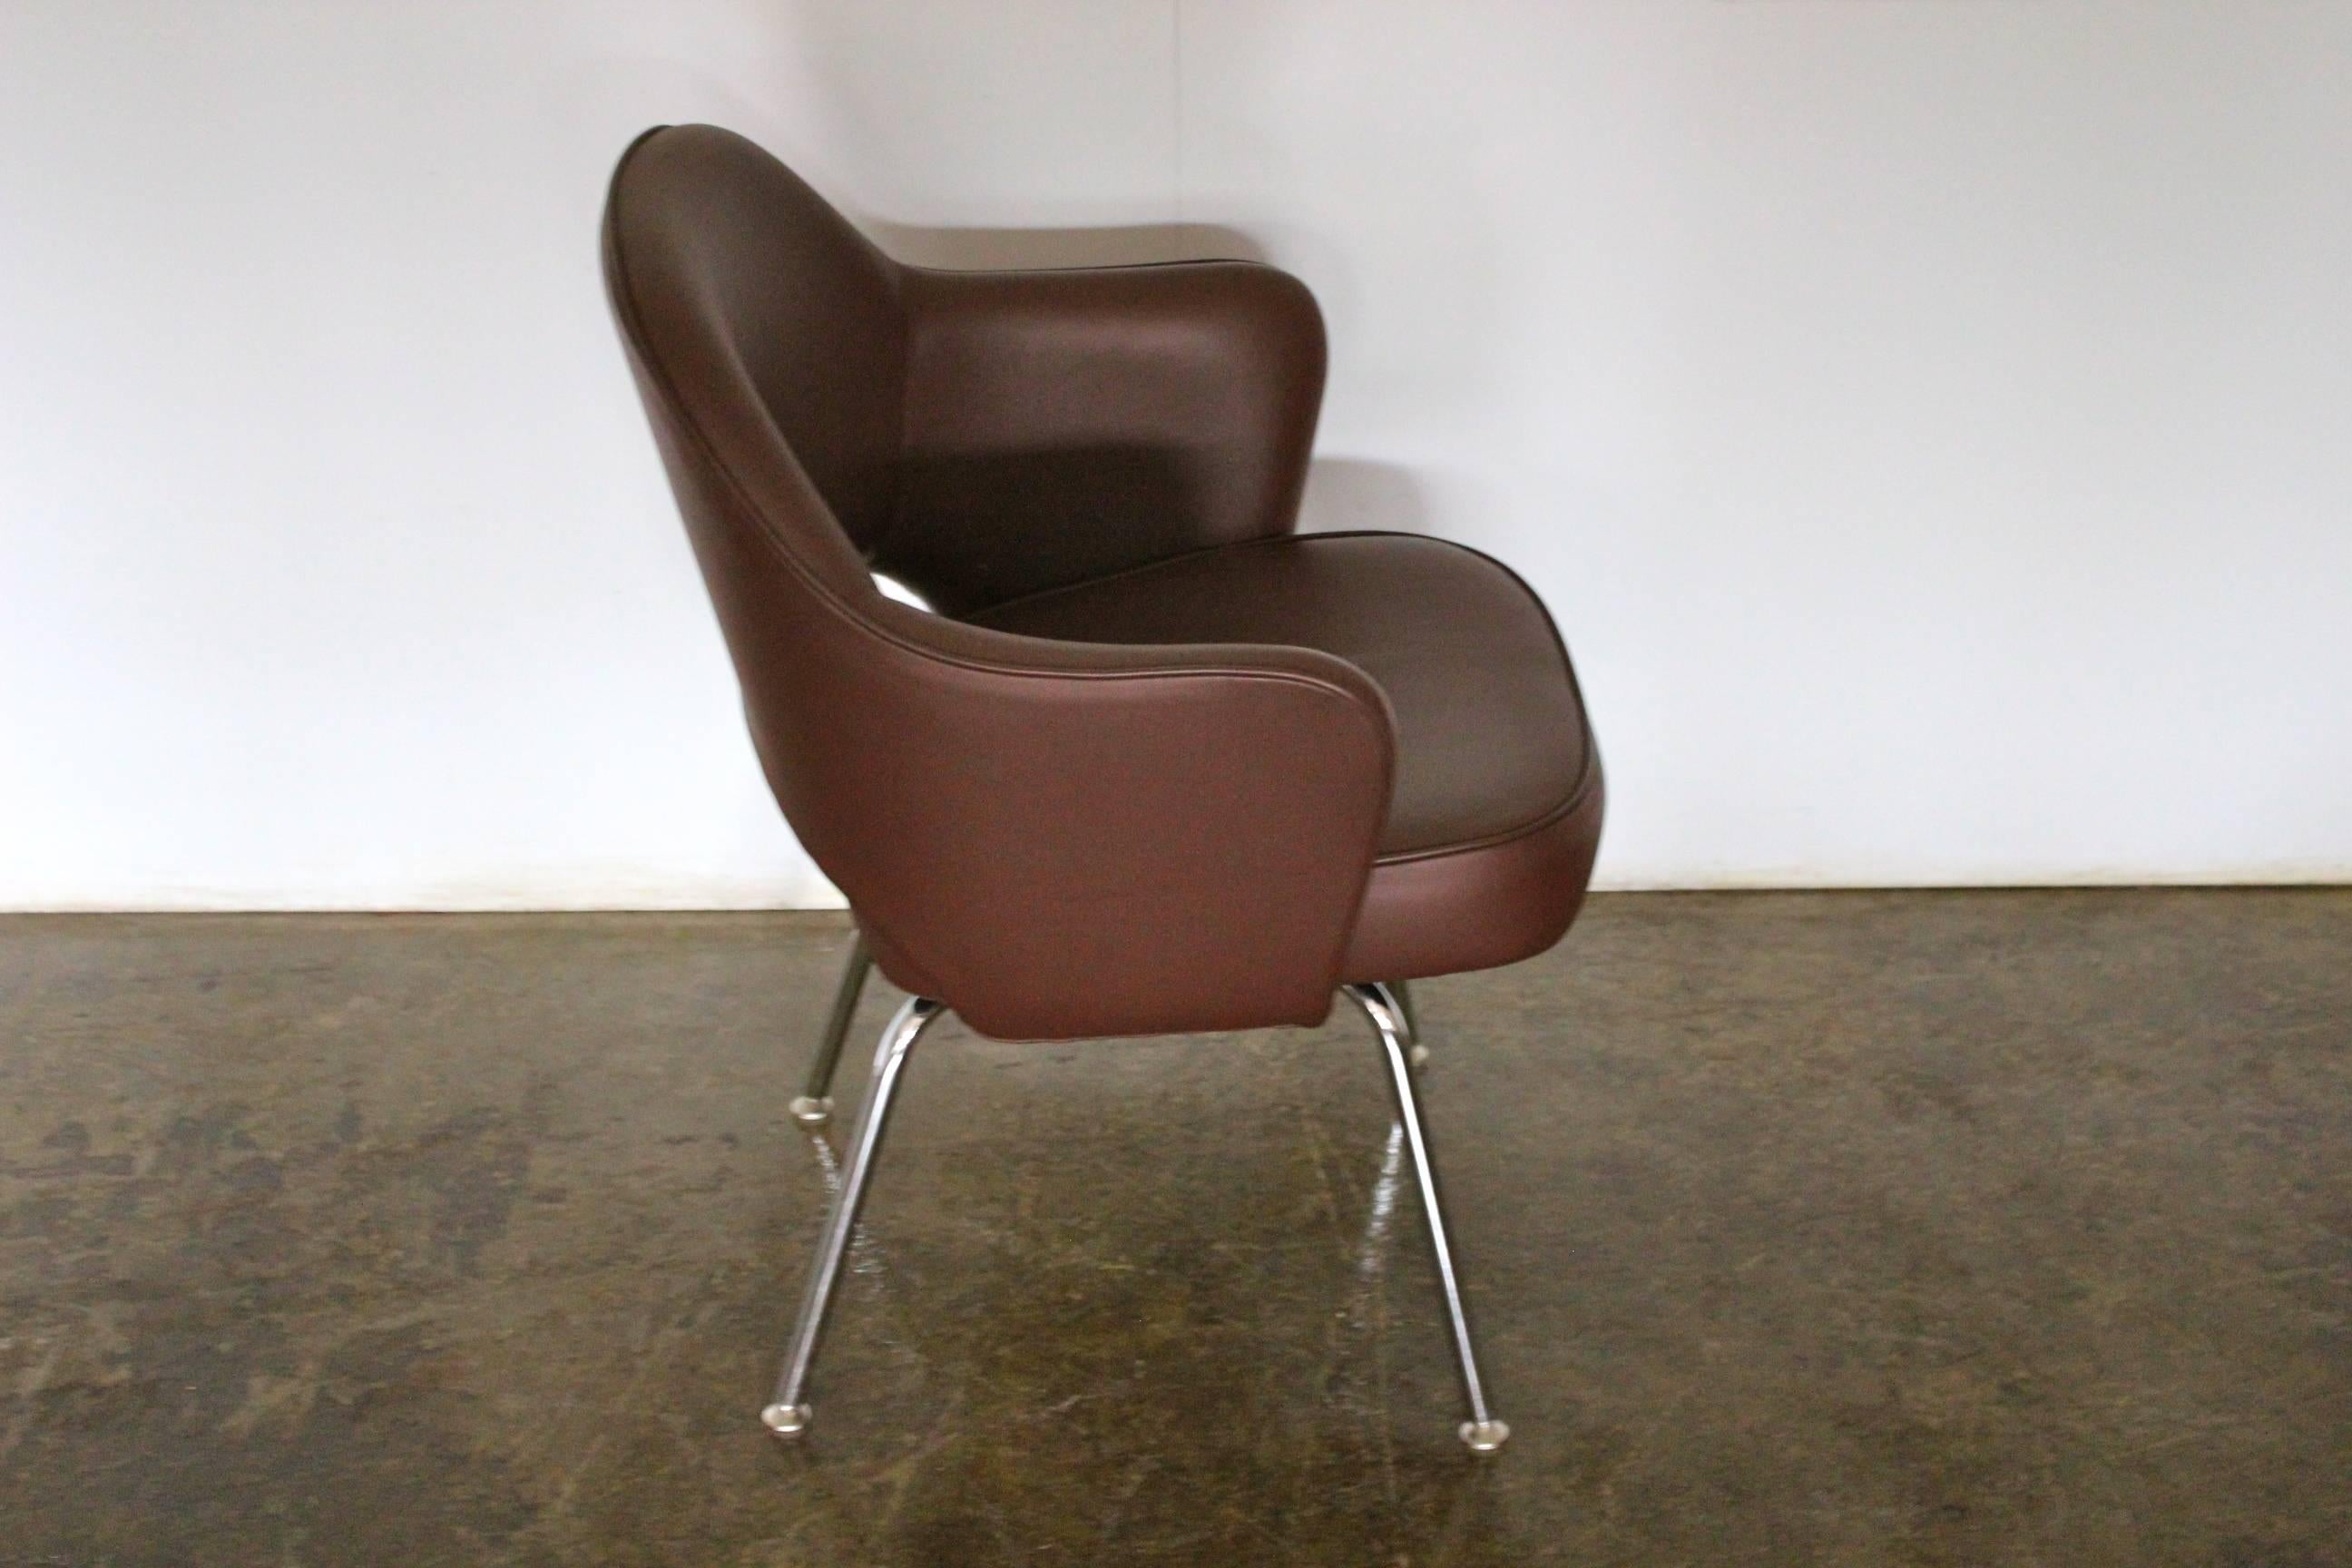 American Knoll Studio “Saarinen Executive” Armchair in “Volo” Brown Leather For Sale